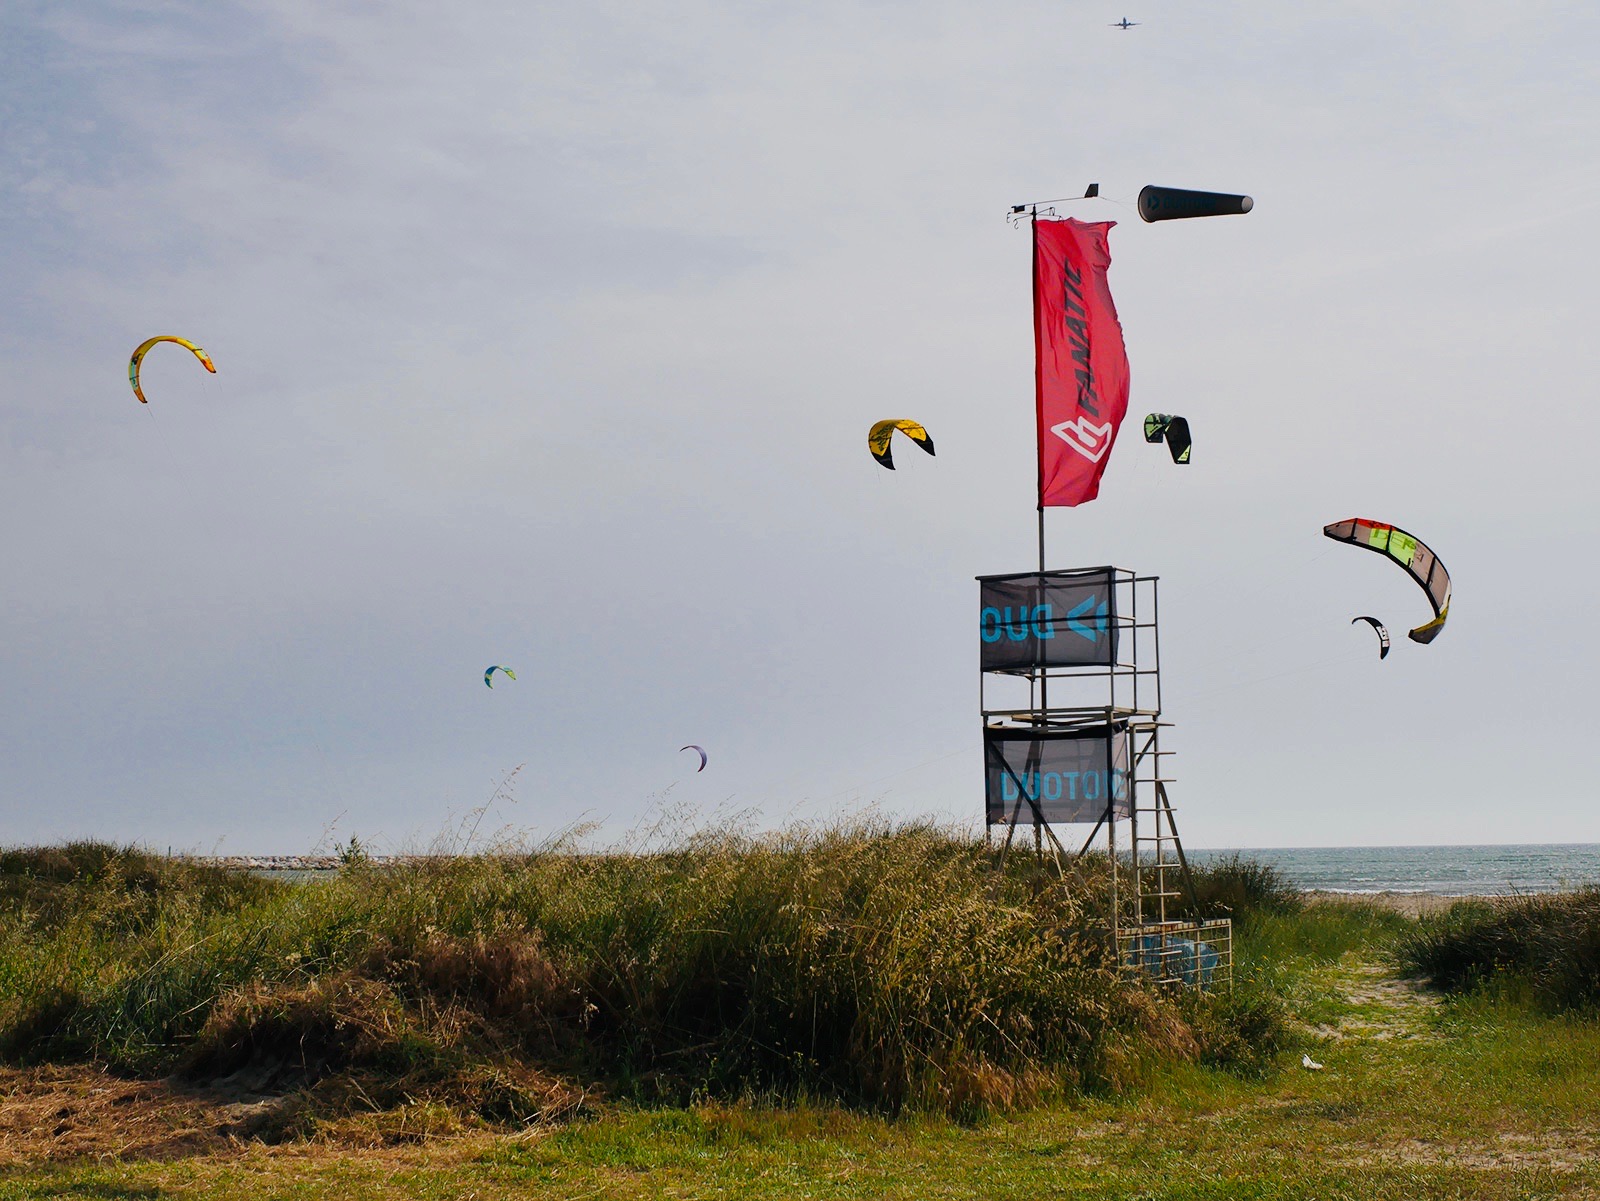 Wind sock and kites flying in the air at Calambrone kite centre.